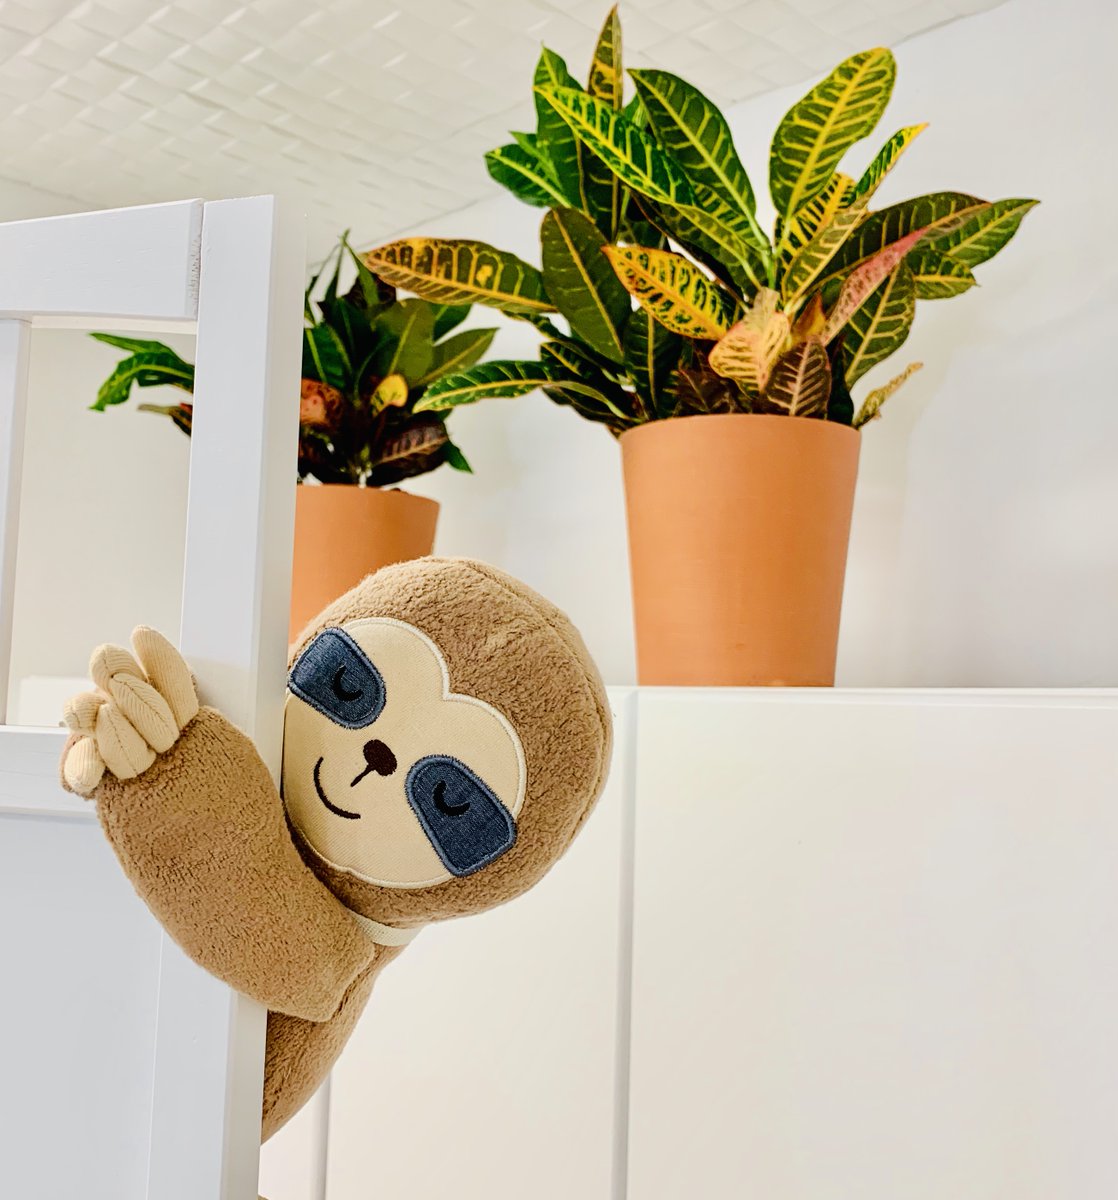 Our little sloth from @appleparkkids hanging out and enjoying the fun. Come see him and his #ecofriendly pals!... 
 #OrganicChristmas #SanDiegoHolidays #ShopSmallSanDiego